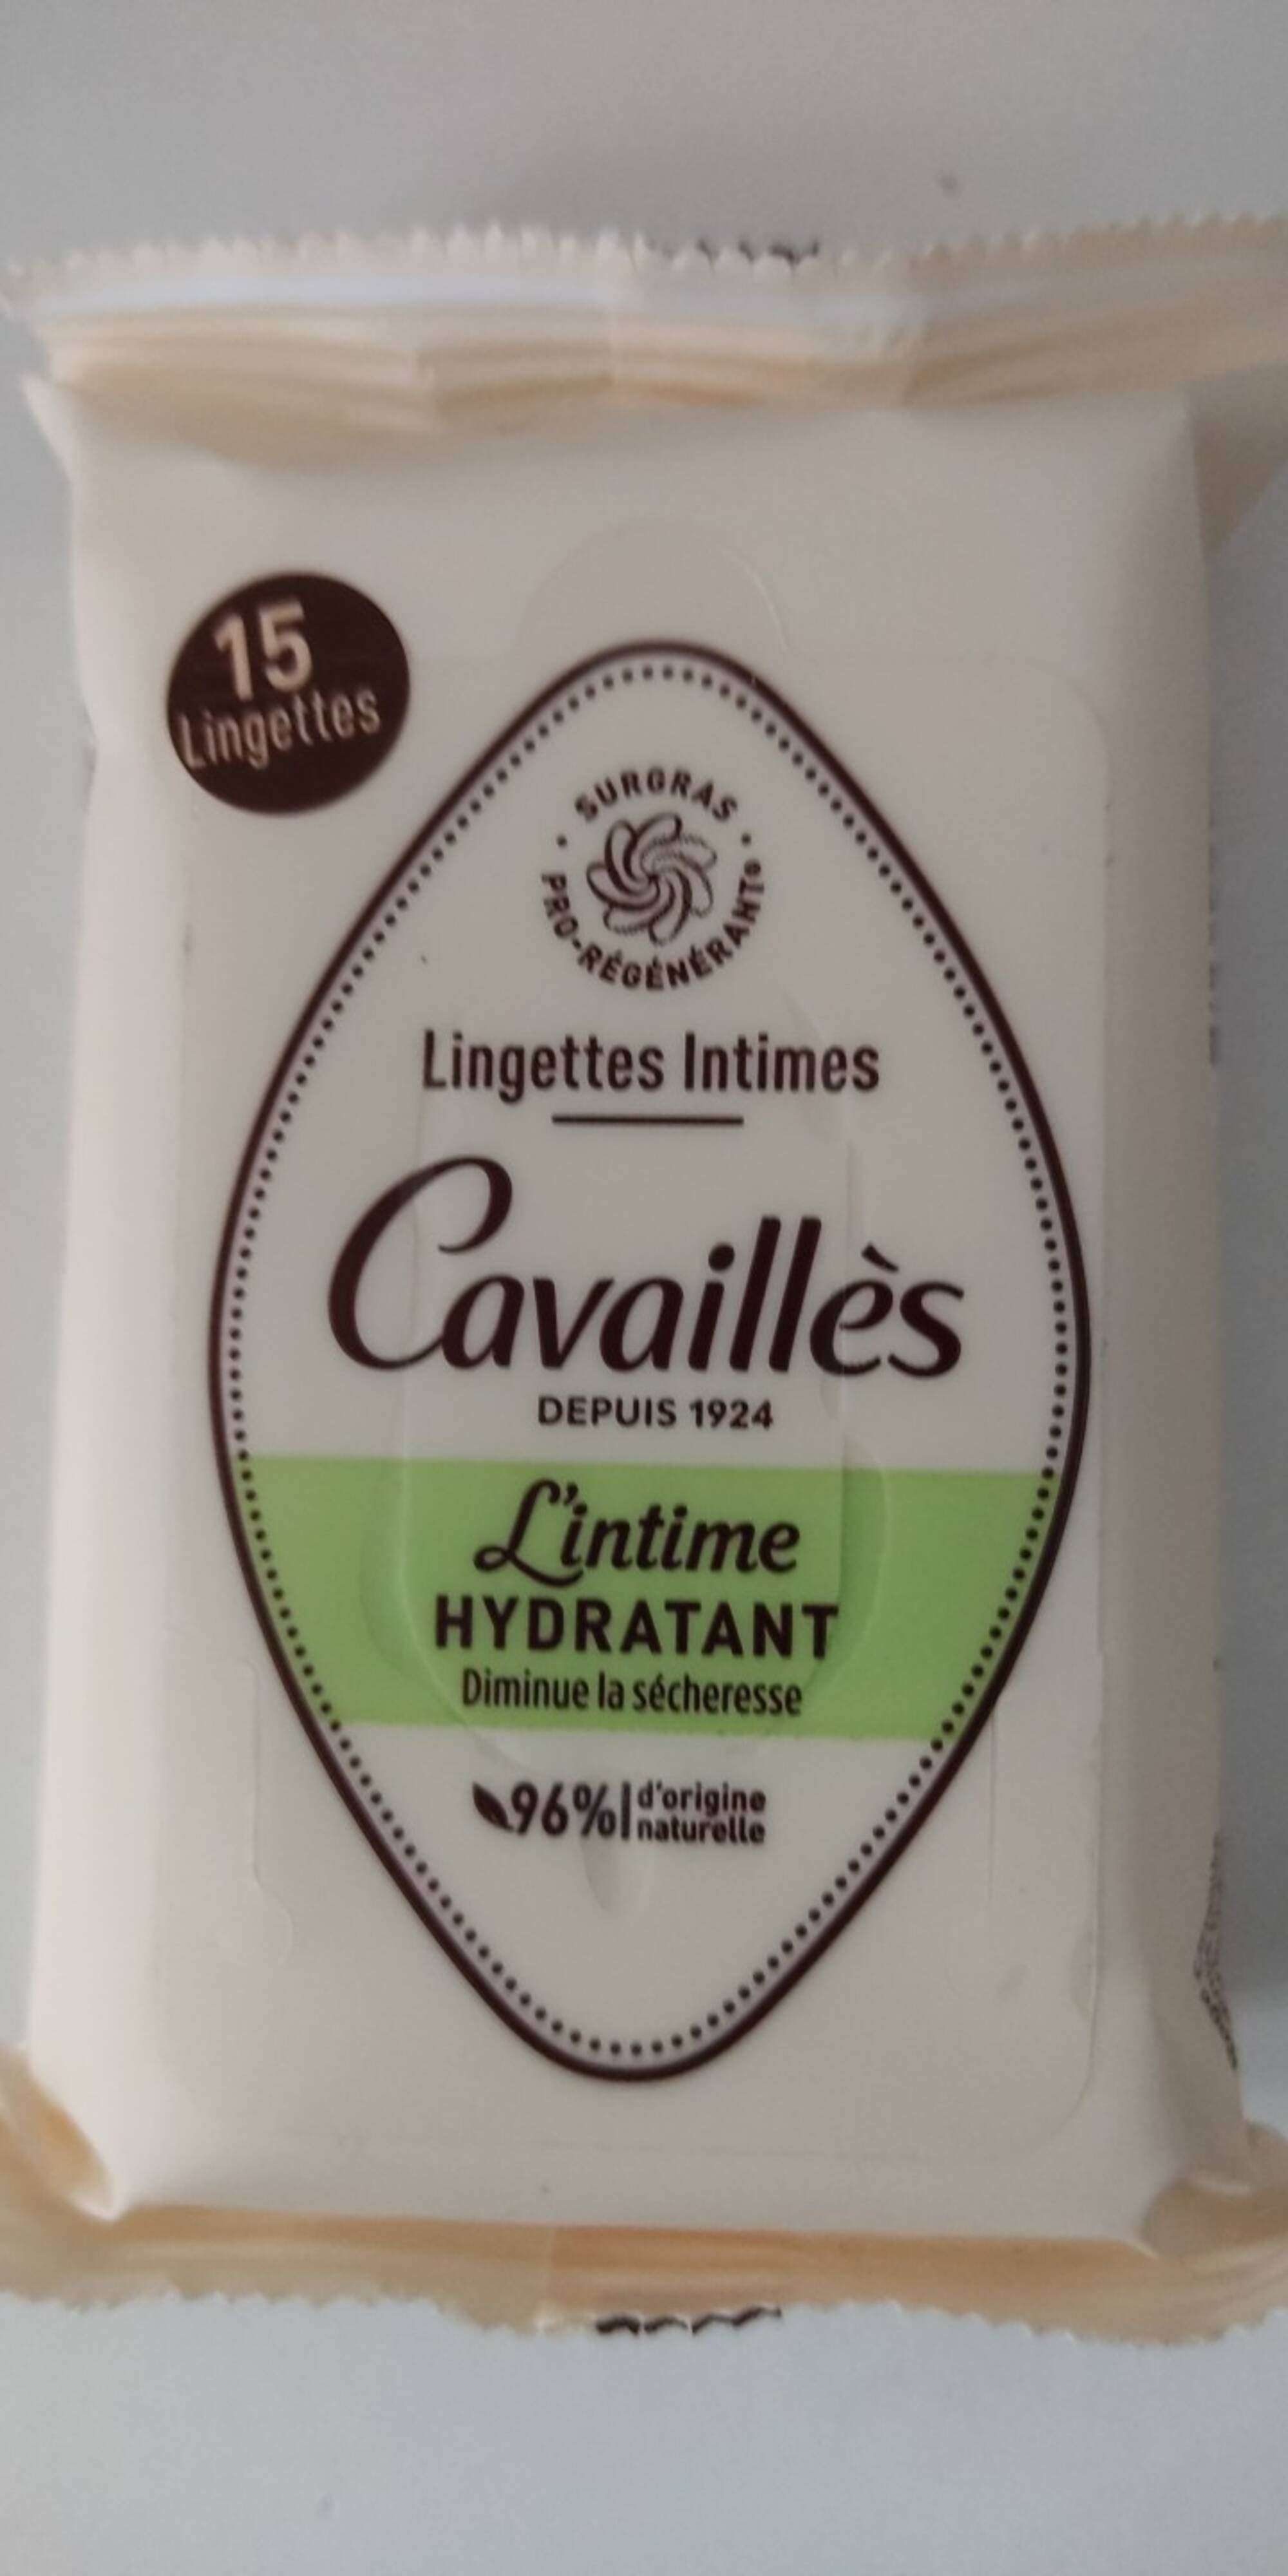 CAVAILLES - L'intime hydratant - Lingettes intimes